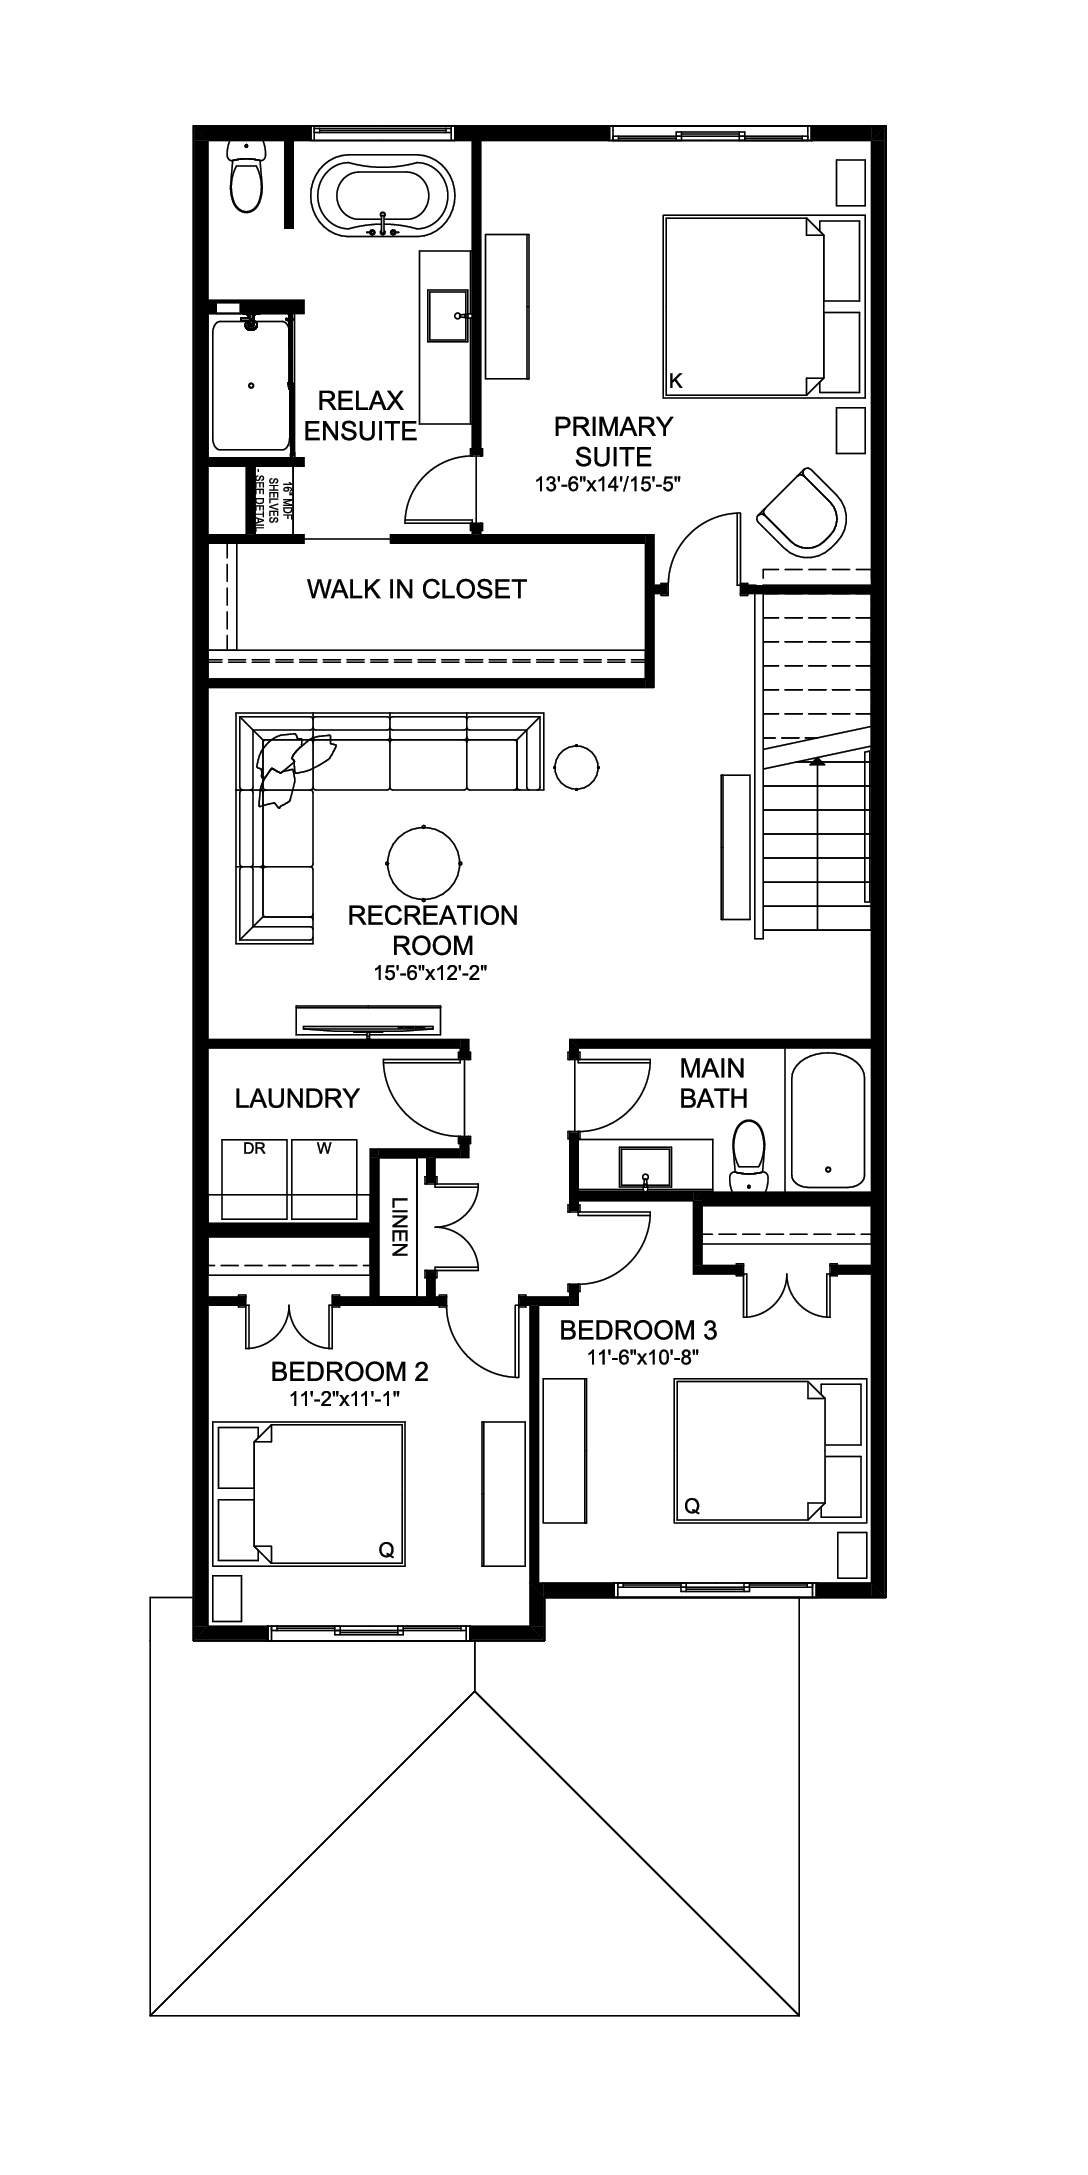  Entertain Impression 24  Floor Plan of Woodhaven Edgemont with undefined beds